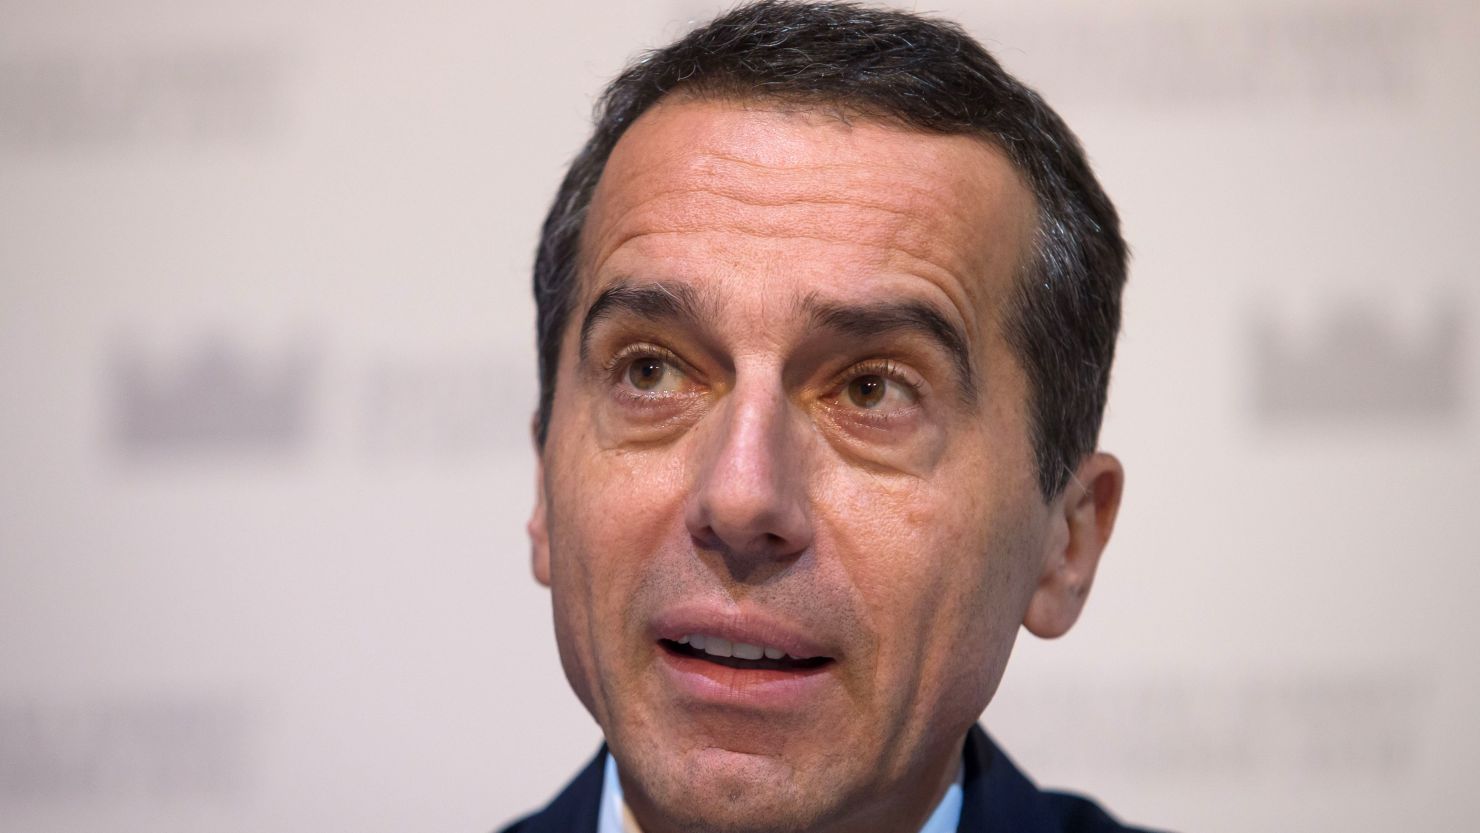 Austria's coalition government, led by Chancellor Christian Kern, had been expected to govern until 2018.